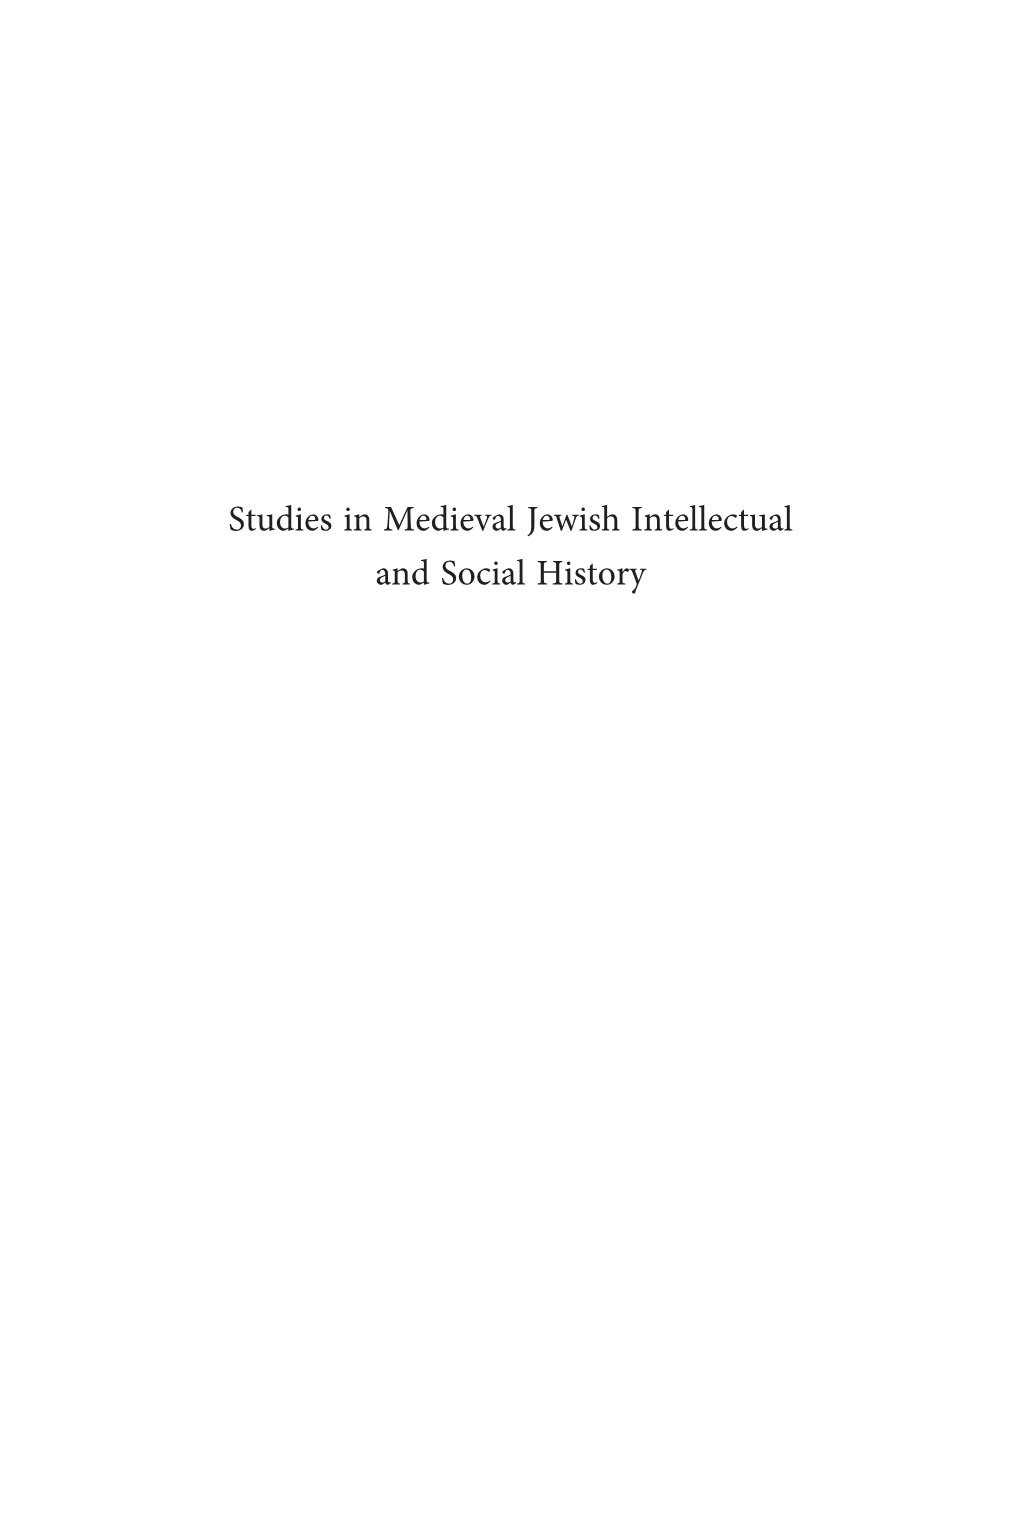 Studies in Medieval Jewish Intellectual and Social History Supplements to the Journal of Jewish Thought and Philosophy